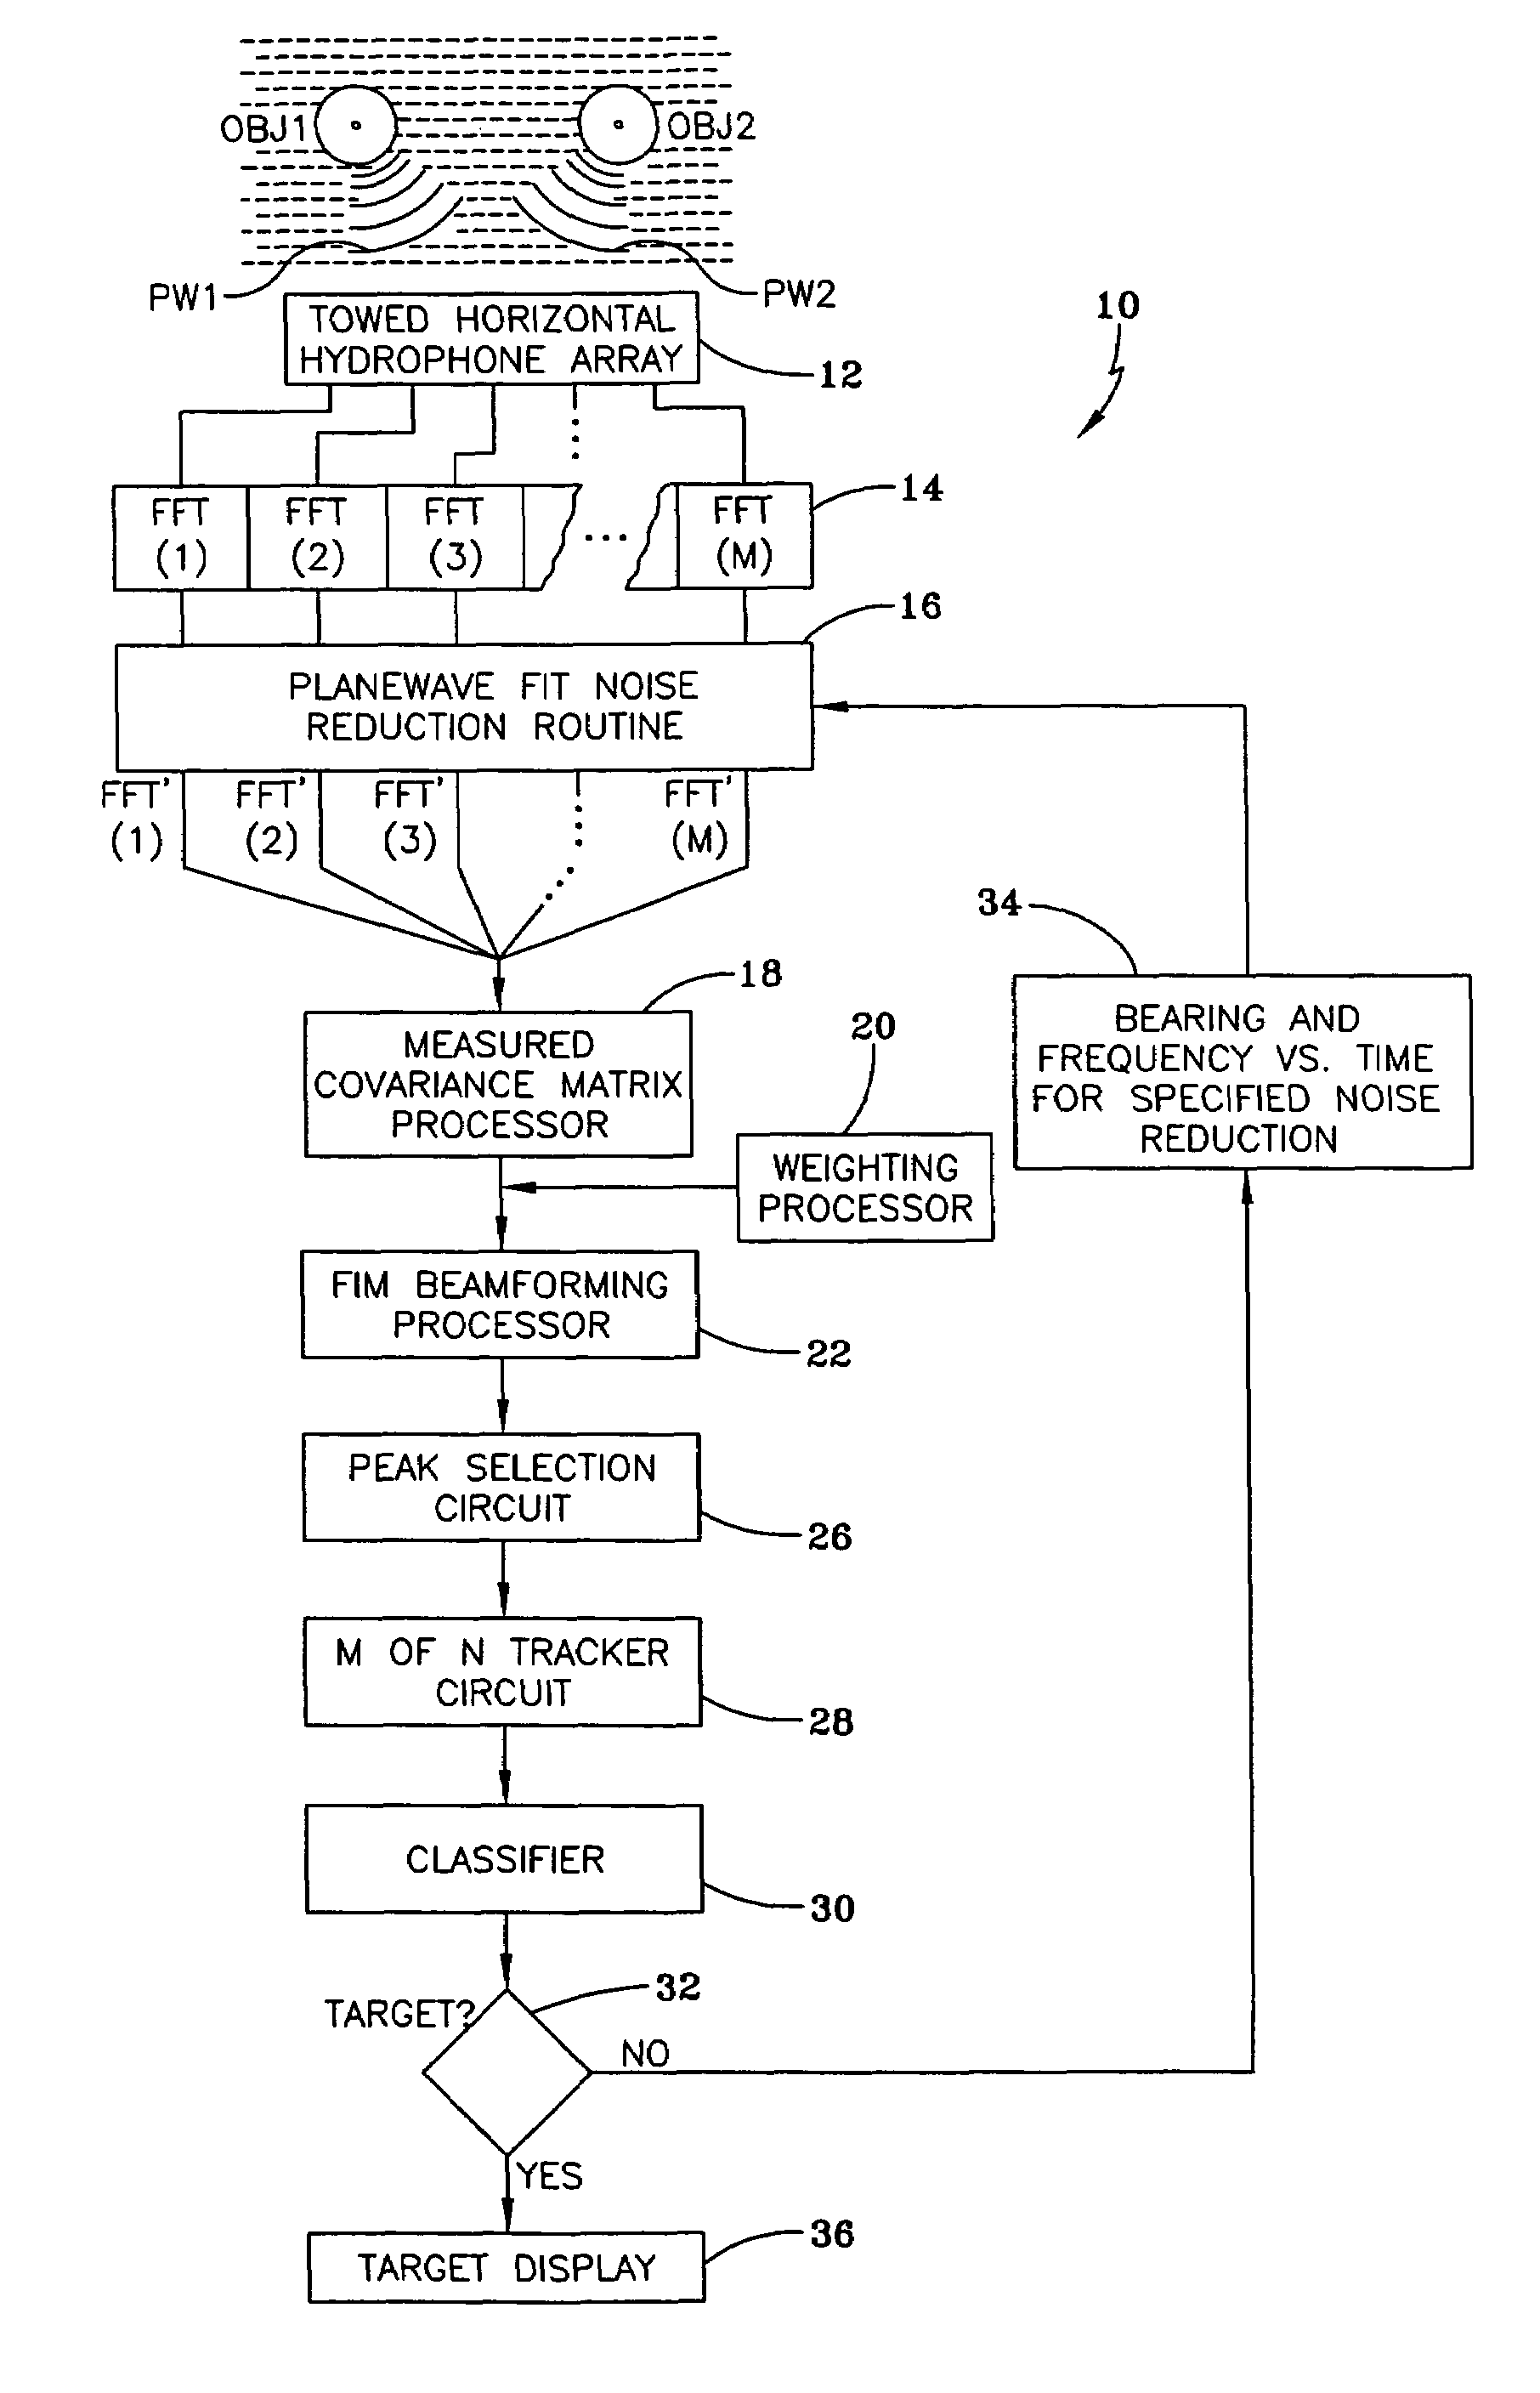 Noise suppression system